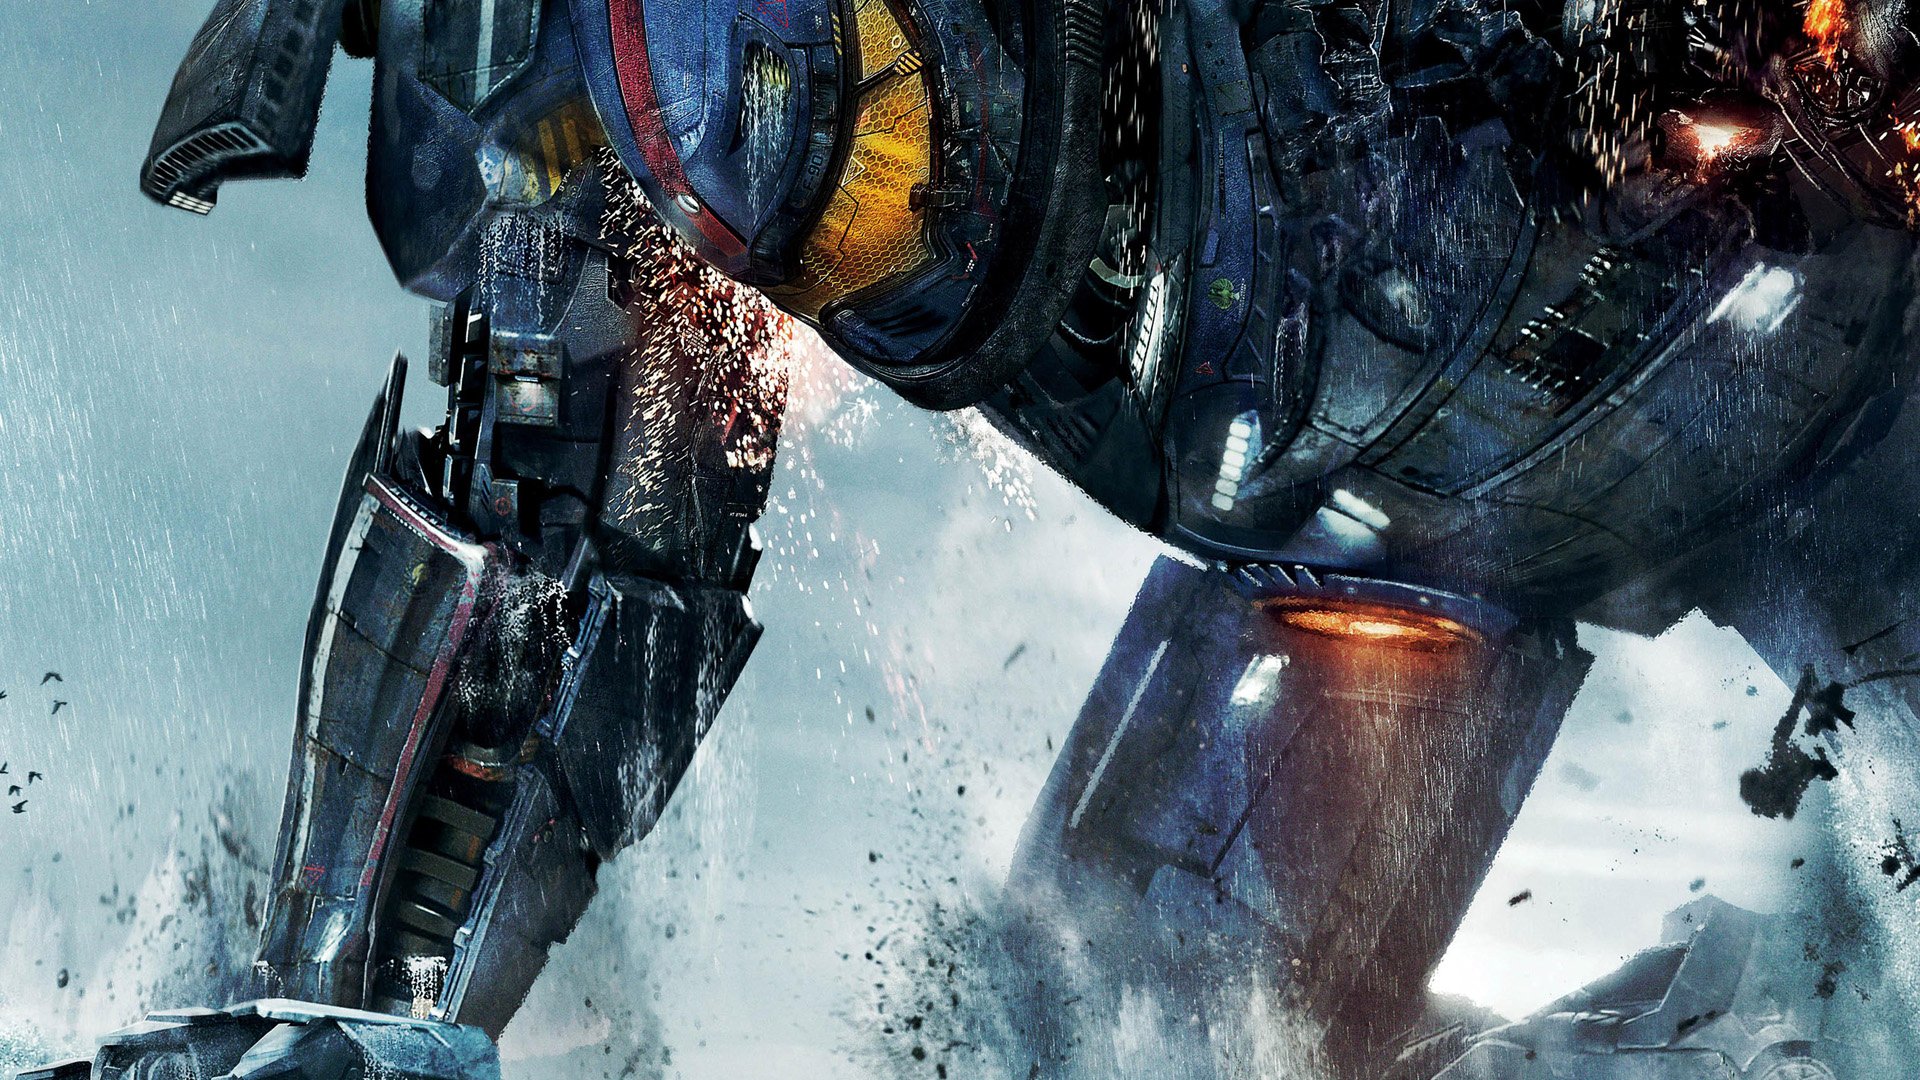 pacific rim Full HD Wallpaper and Background Image | 1920x1080 | ID:447217